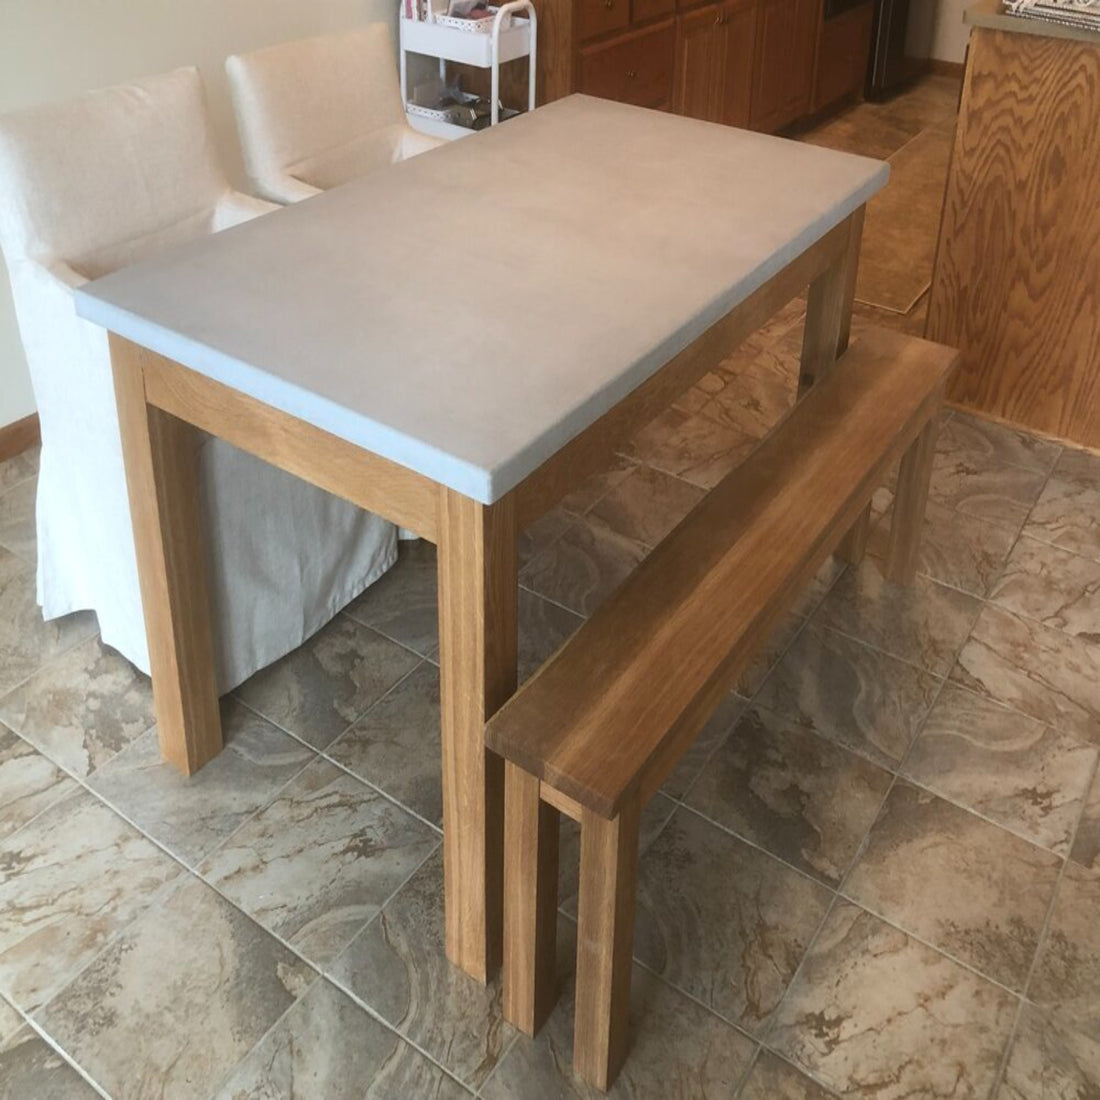 Wood and Concrete Table Bench Dining Room 